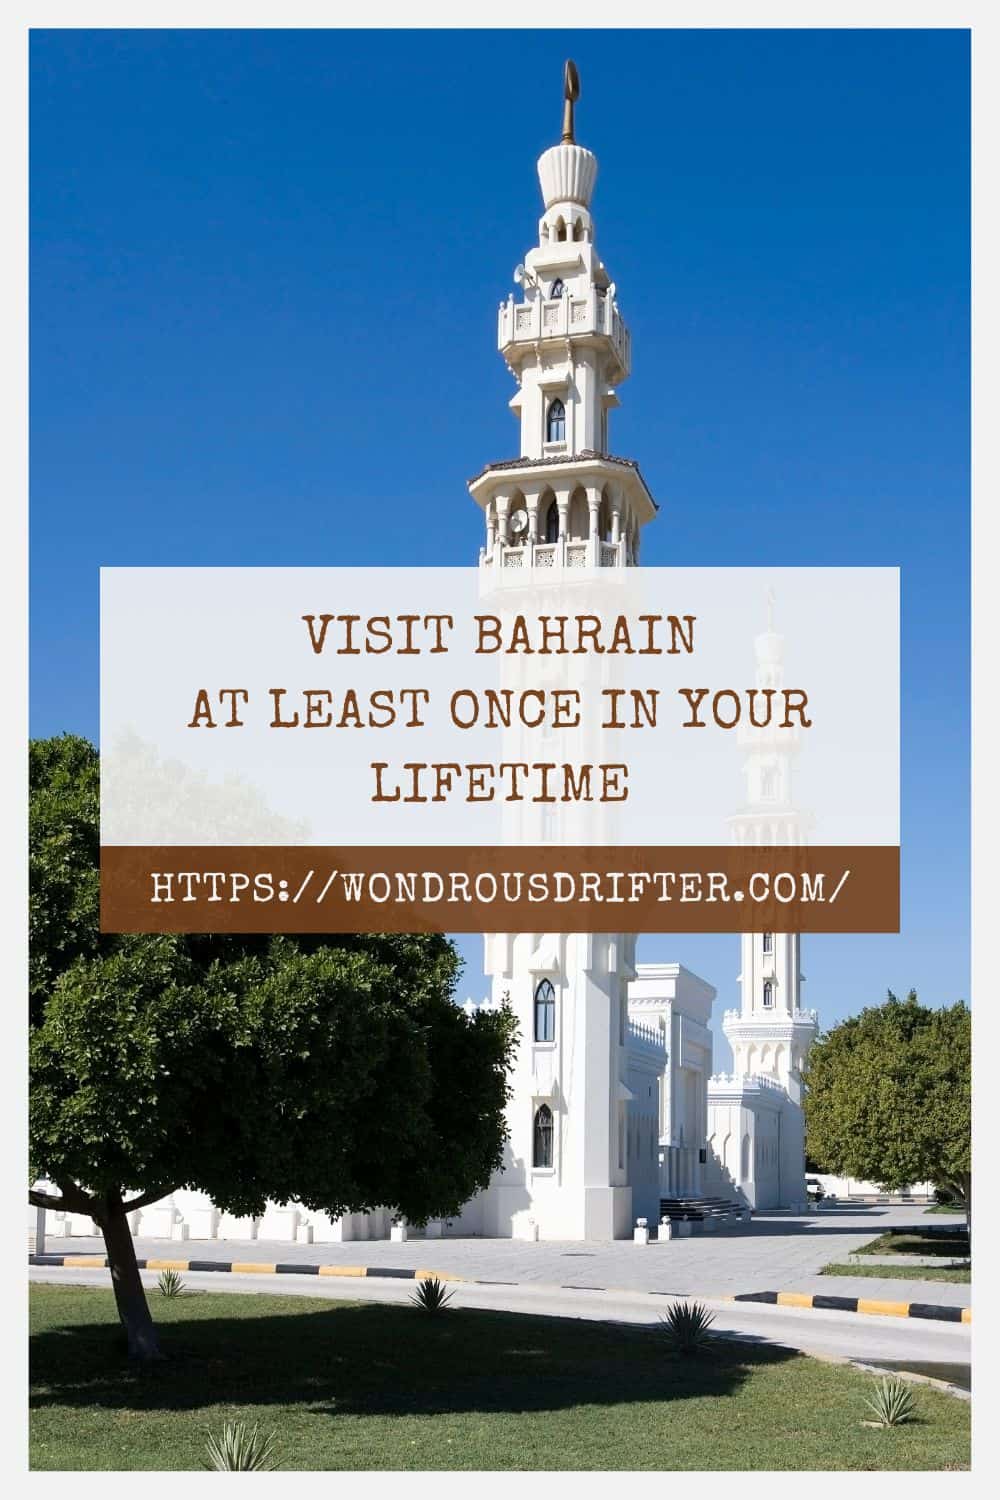 Visit Bahrain at least once in your lifetime